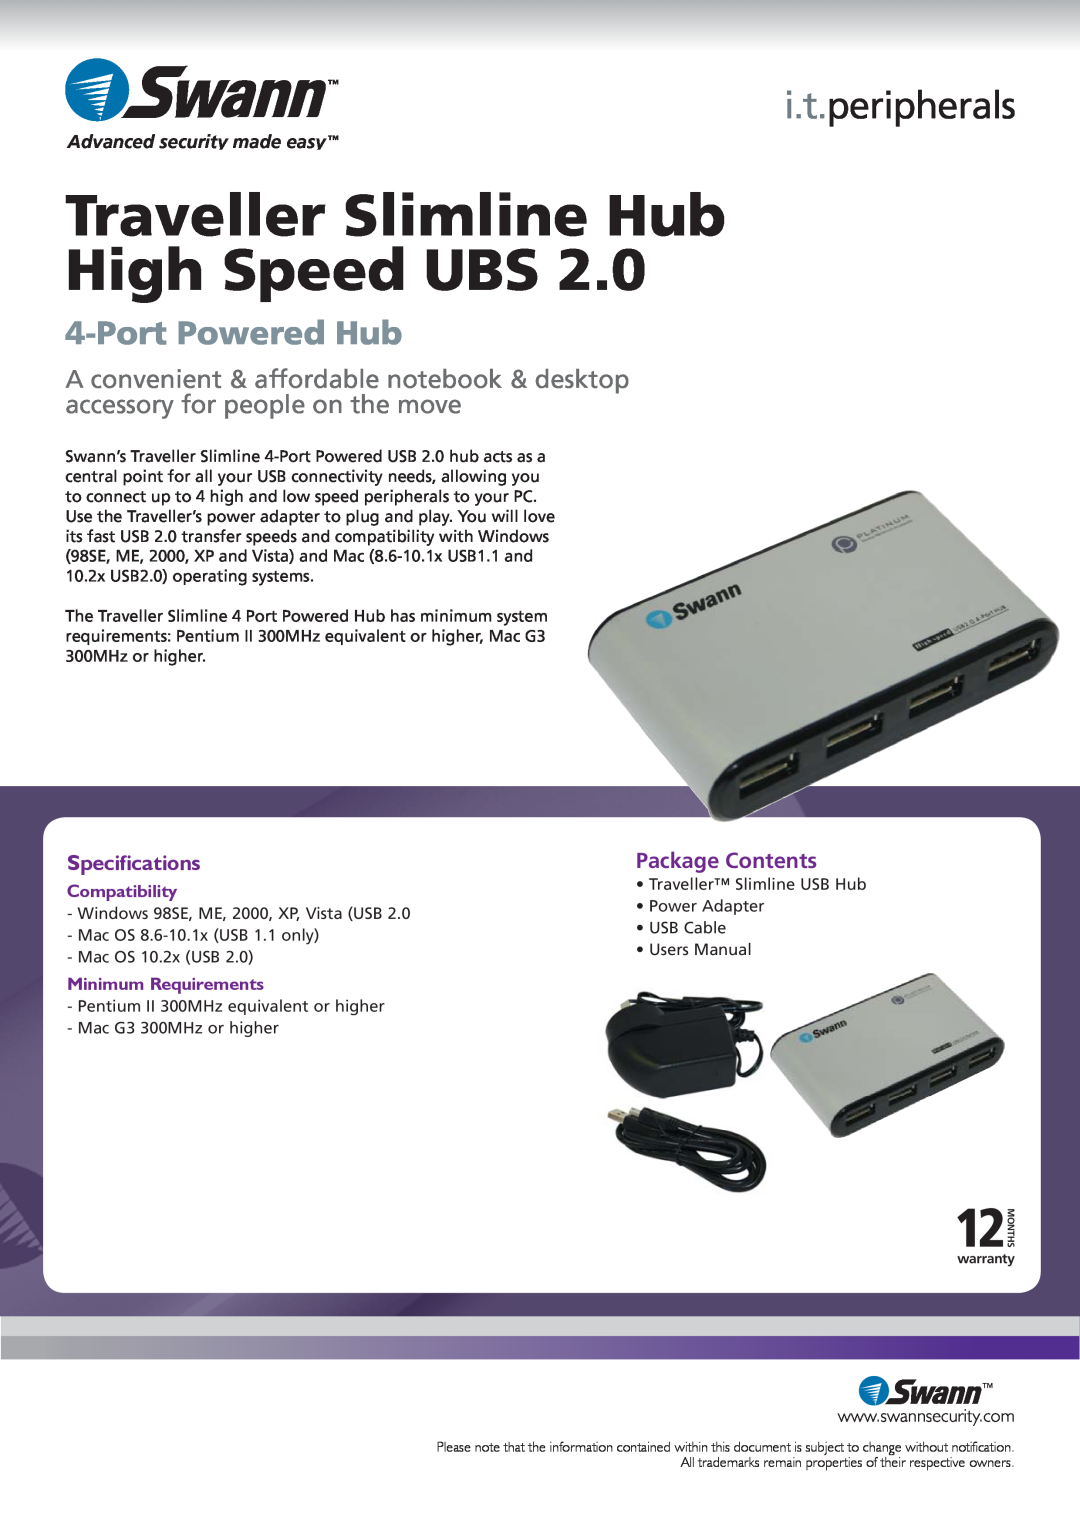 Swann SW120-4PS Traveller Slimline Hub High Speed UBS, i.t.peripherals, Port Powered Hub, Specifications, Package Contents 